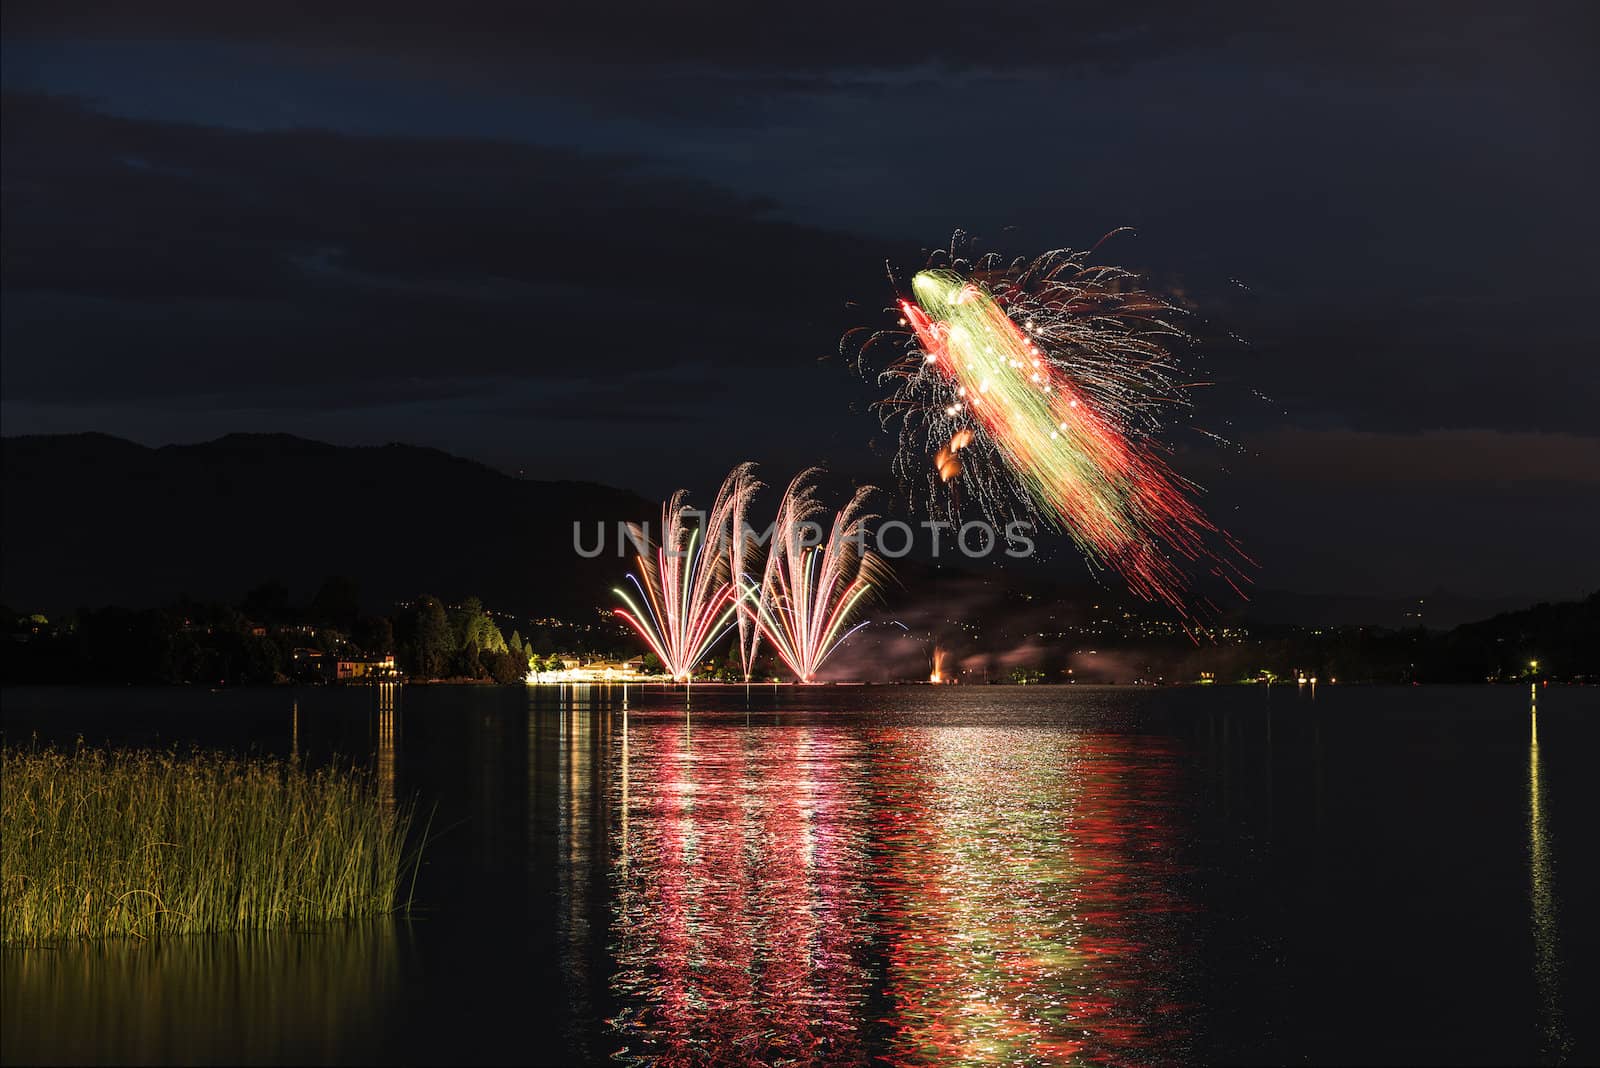 Fireworks on the lakefront of Travedona Monate, Lombardy by Mdc1970